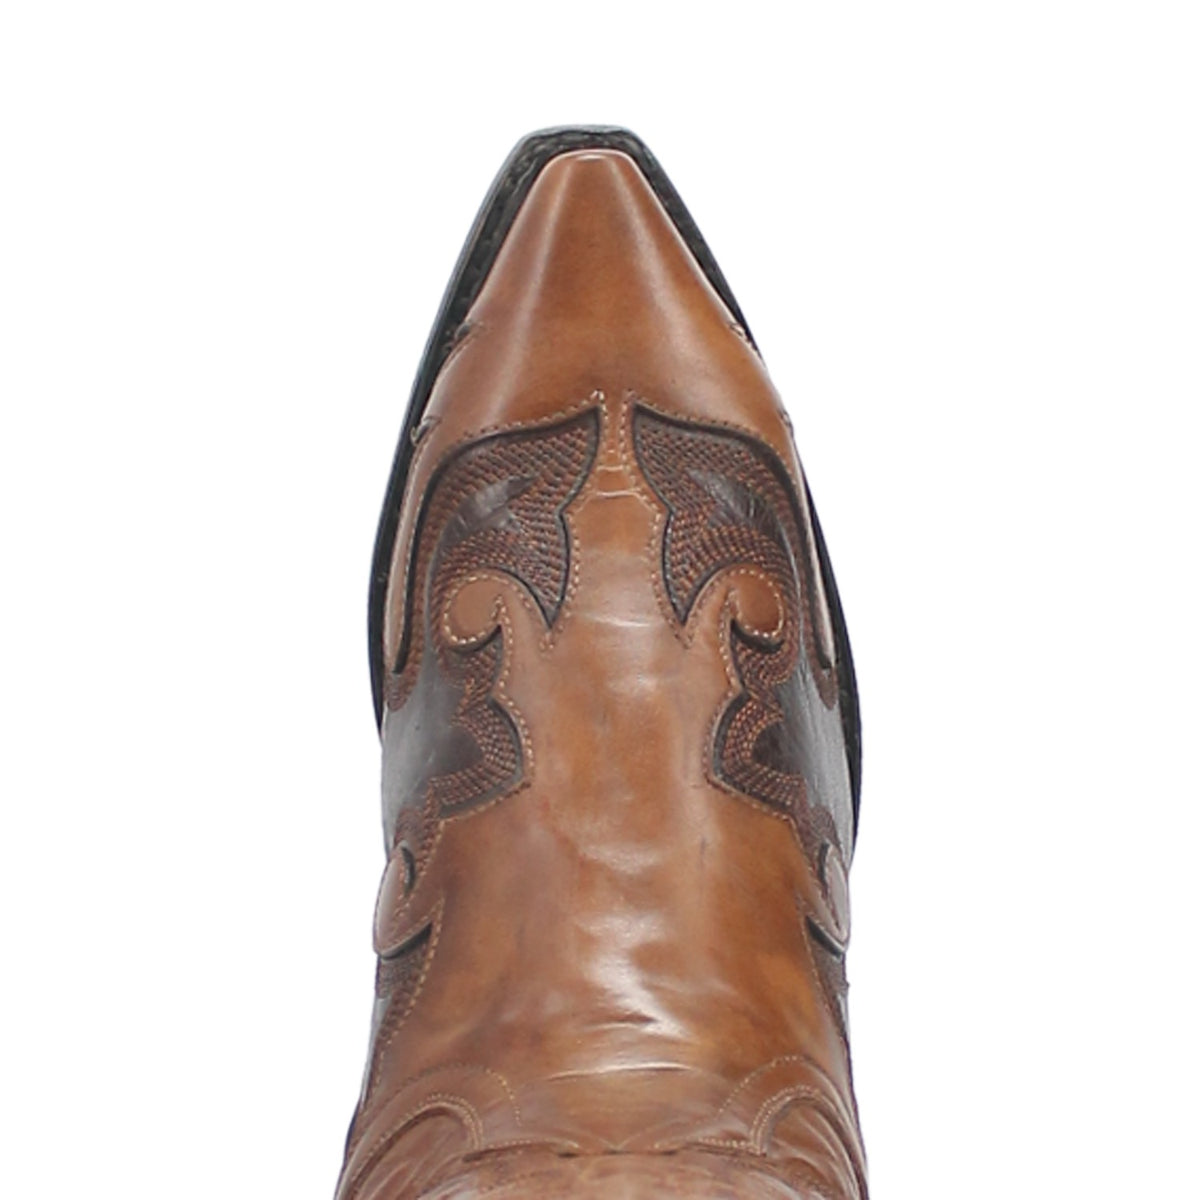 HONKY TONK LEATHER BOOT Cover